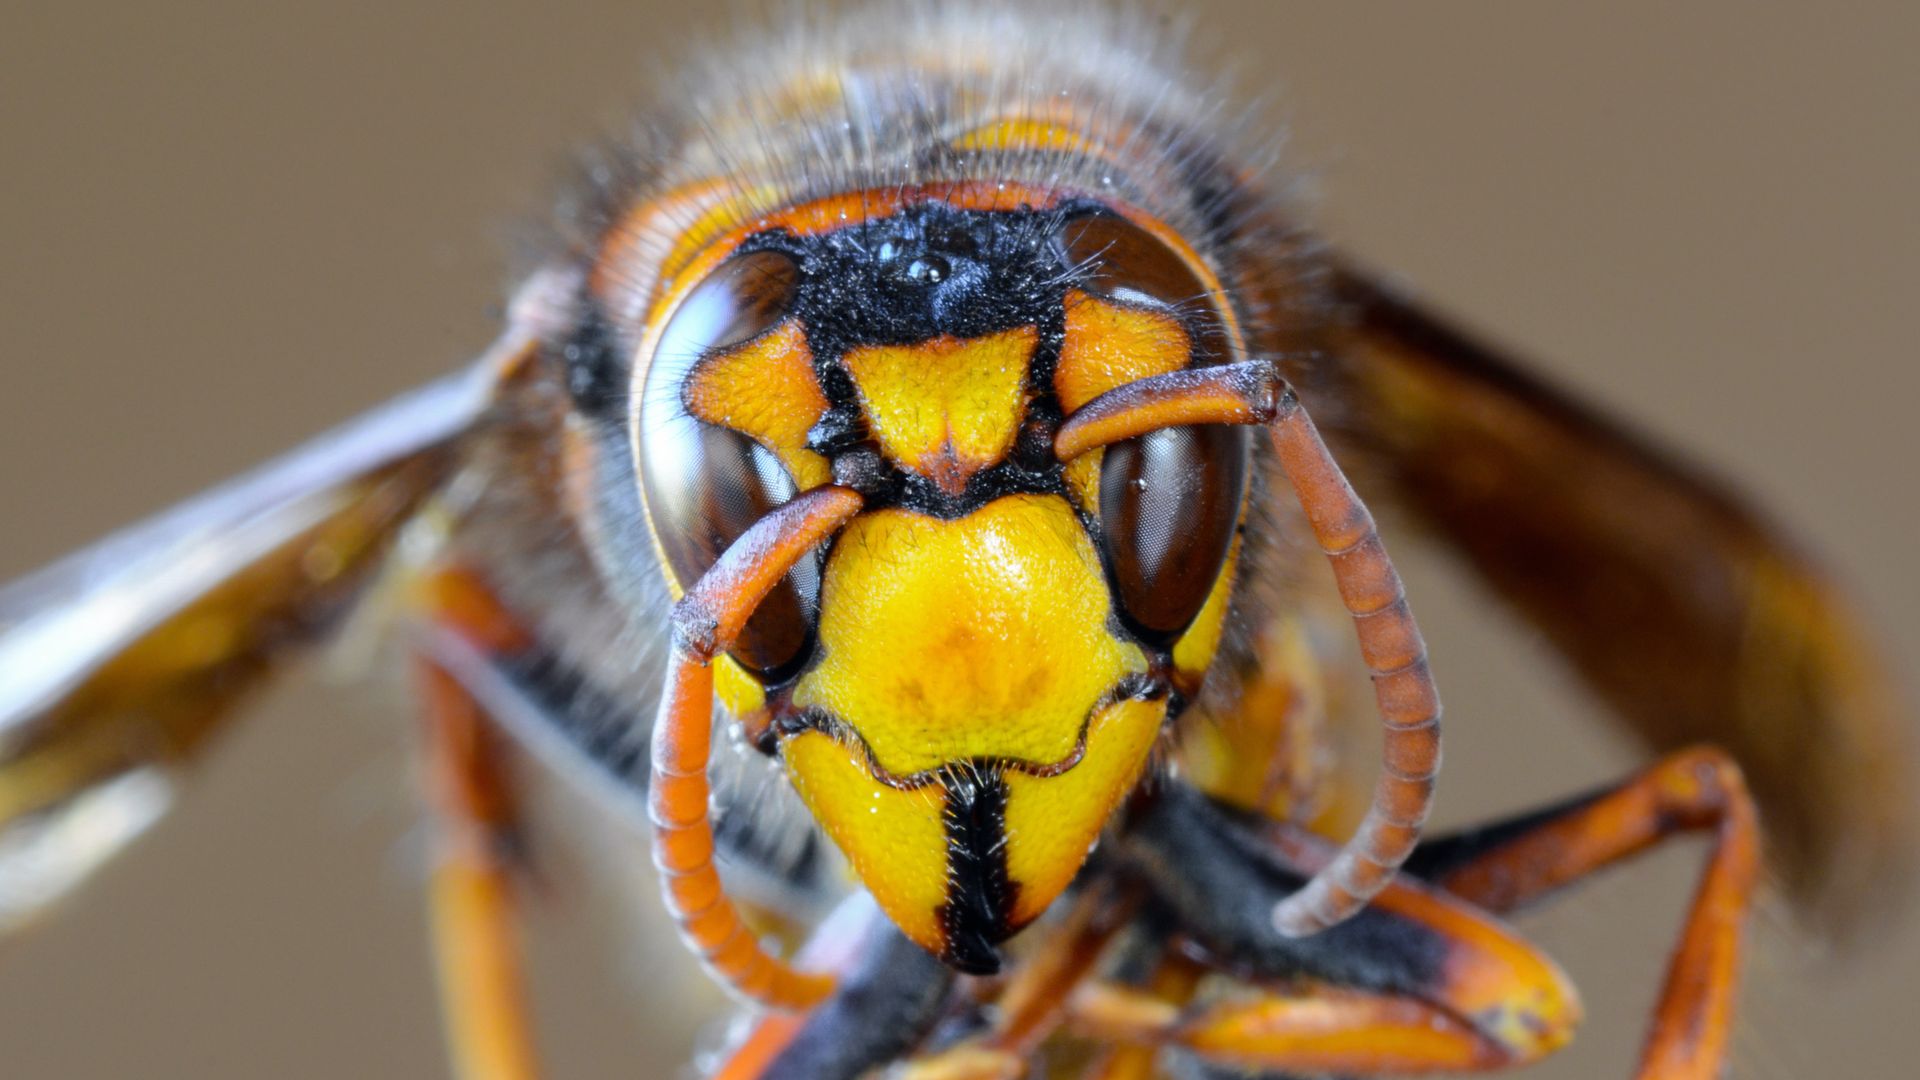 Asian hornet warning for UK - and what to do if you spot one